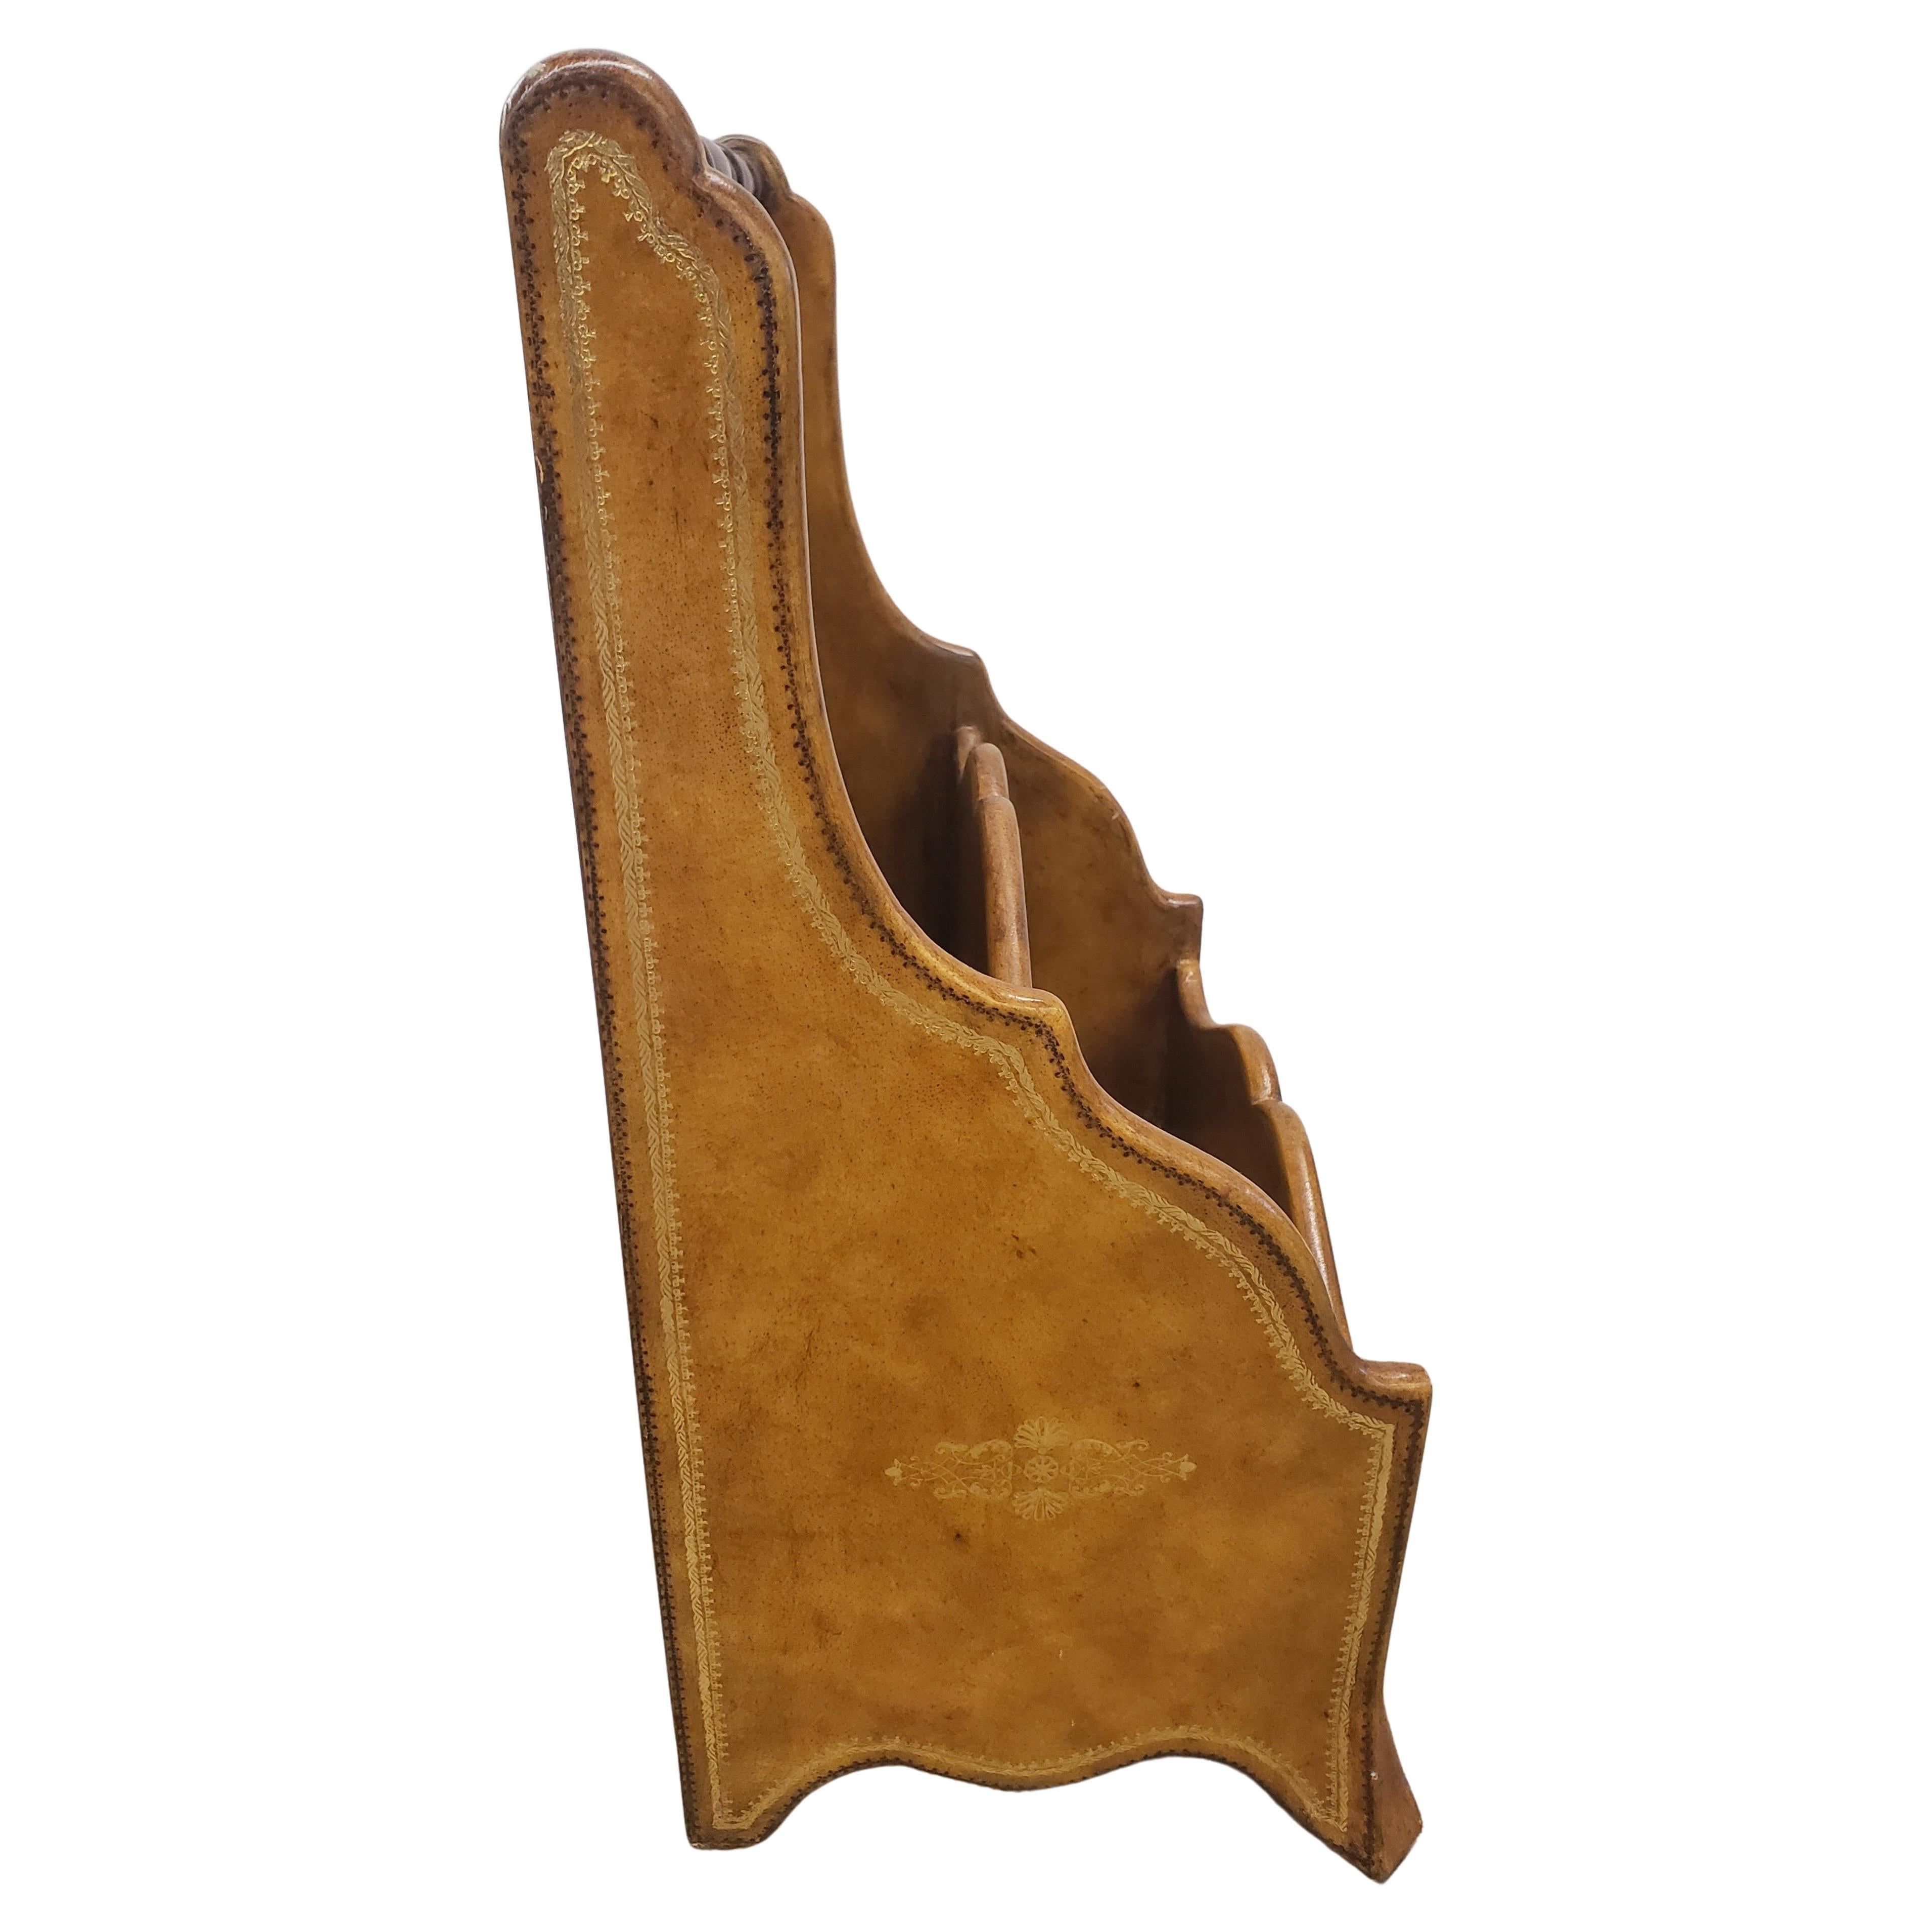 Maitland Smith Neoclassical Brown Leather Upholstered Magazine or Letter Stand For Sale 2